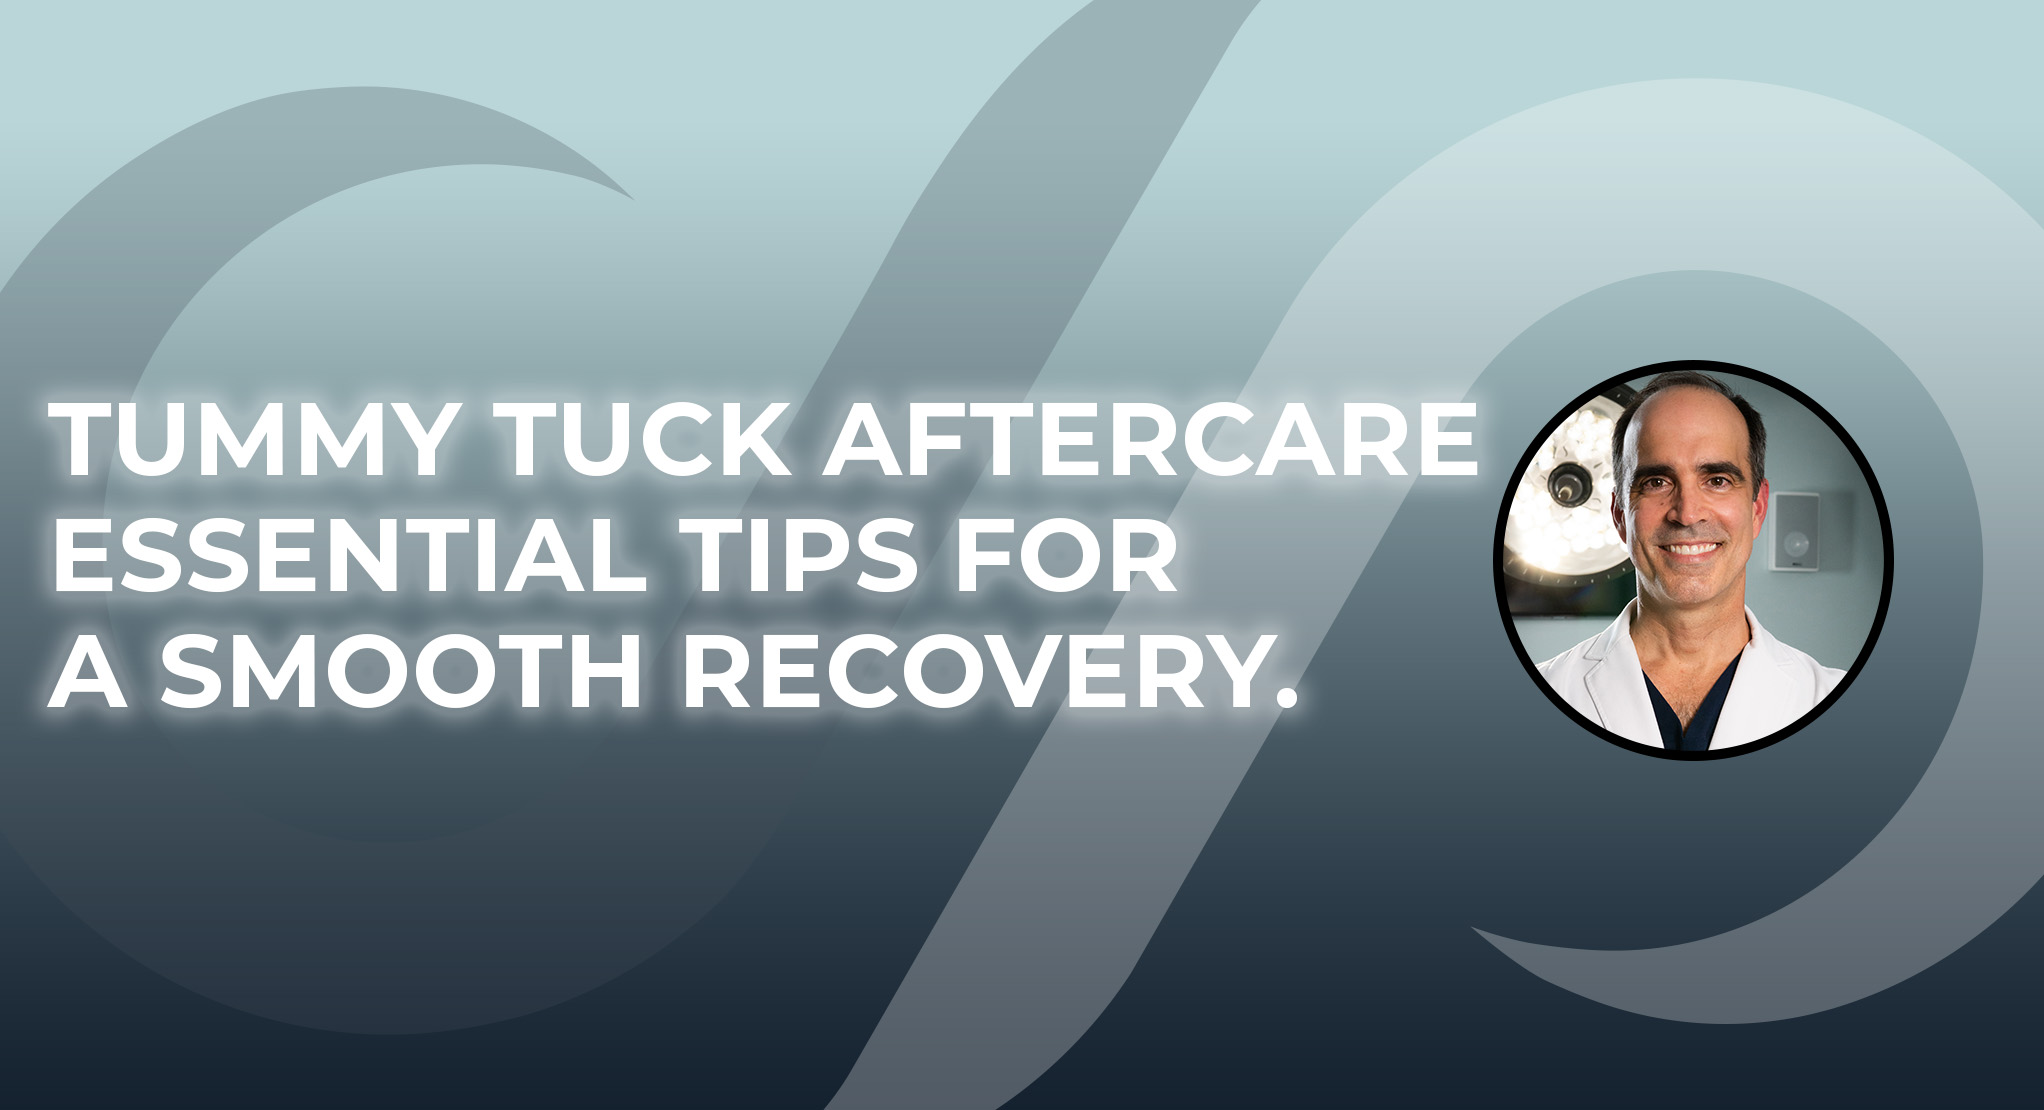 What to Expect during Recovery after Tummy Tuck - Anca Breahna